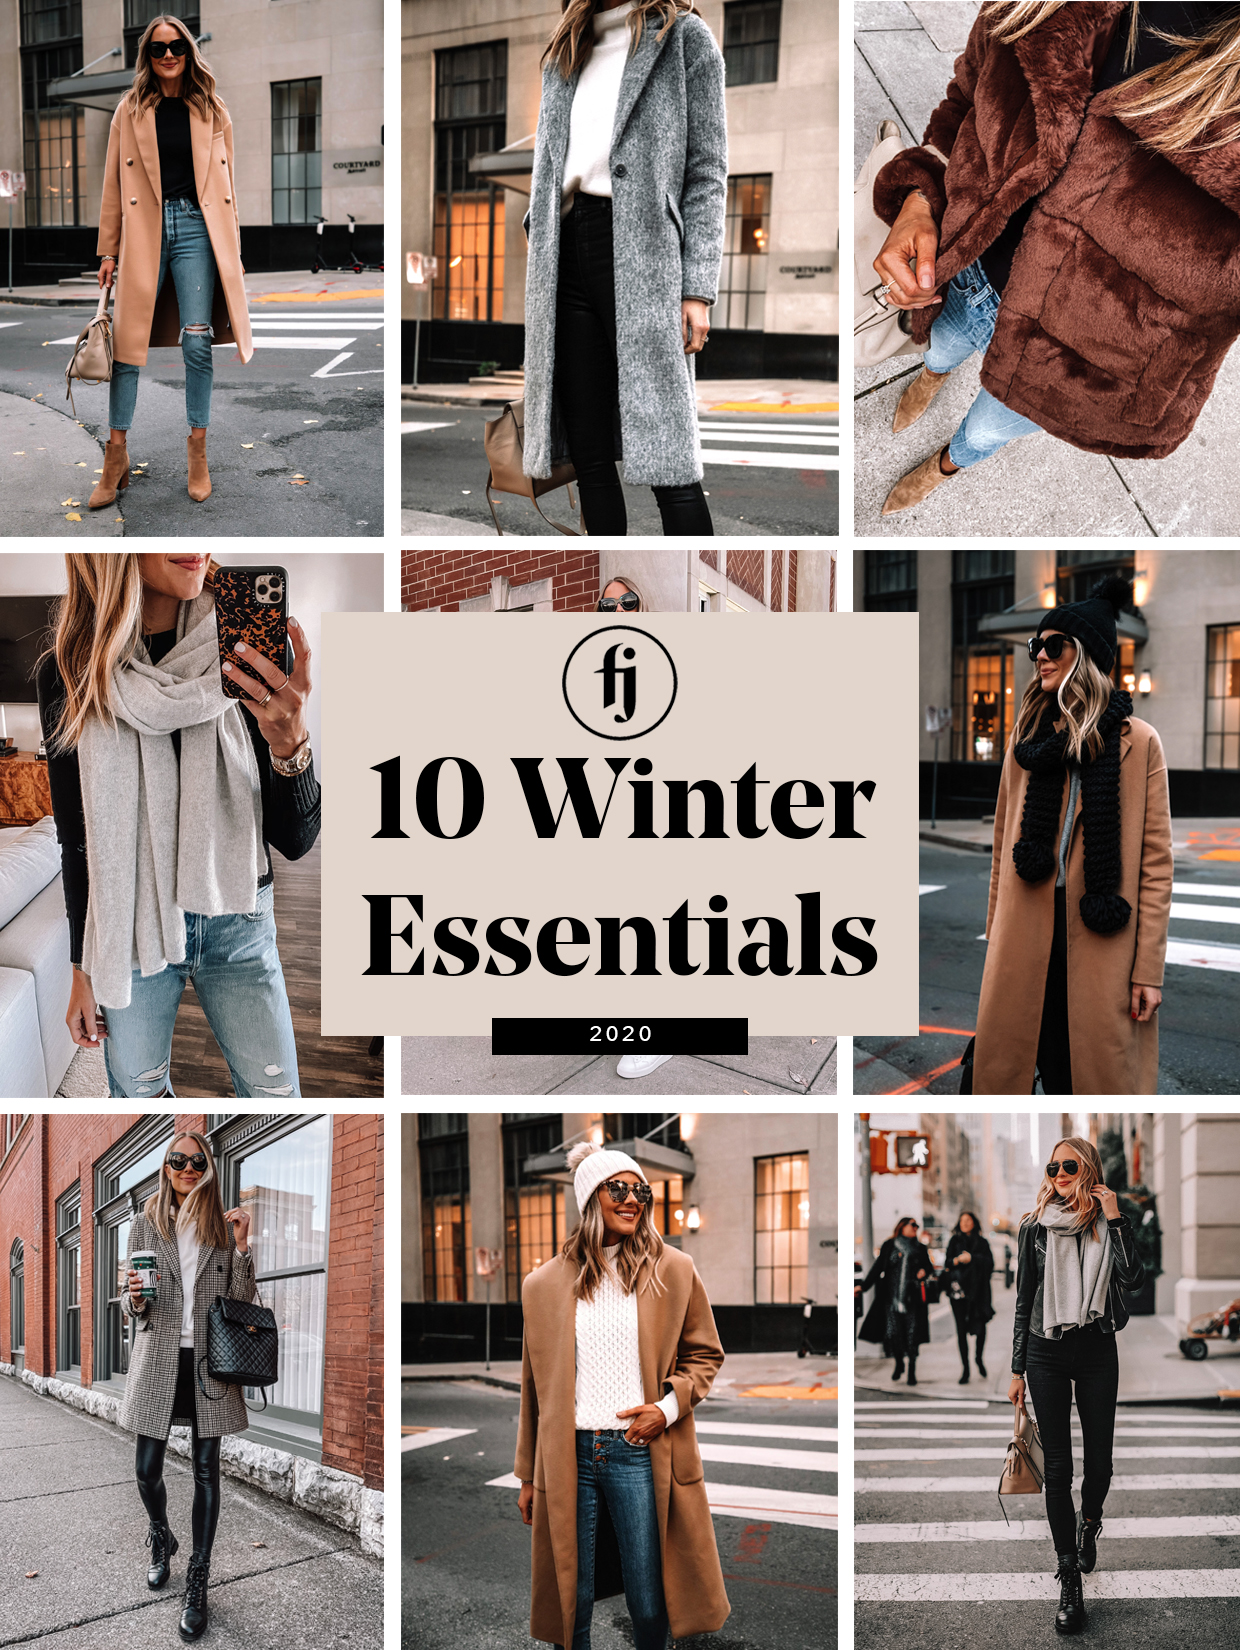 The Life of a Winter Wardrobe - What Is The Ultimate Winter Outfit? -  Fashion, Home & Lifestyle Inspiration